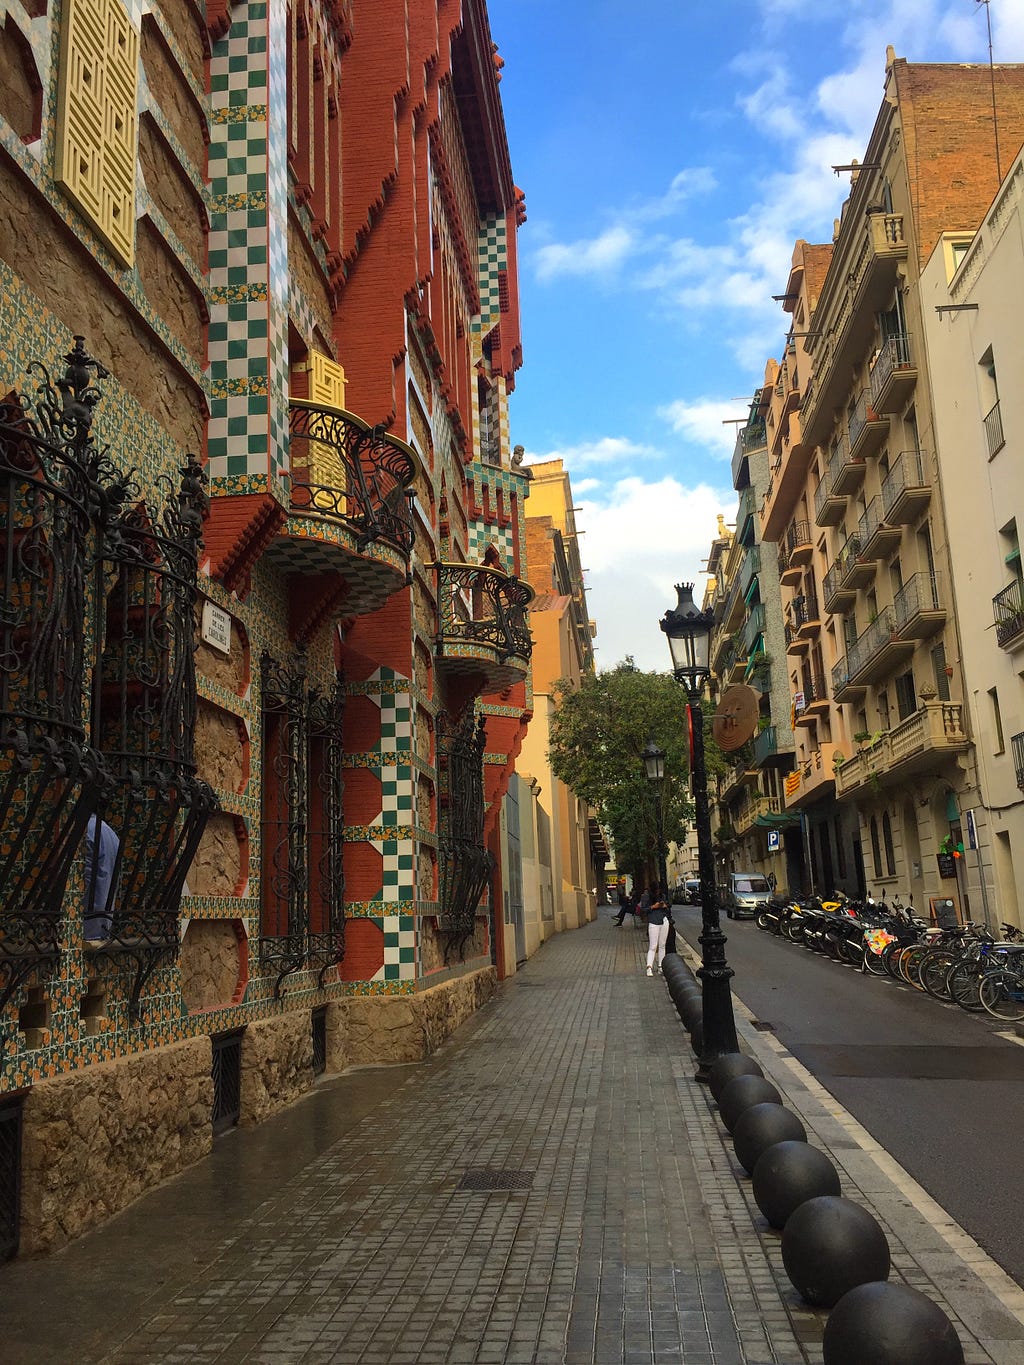 Casa Vicens in Barcelona — a lego-like house covered in red brick, as well as green and white tile.